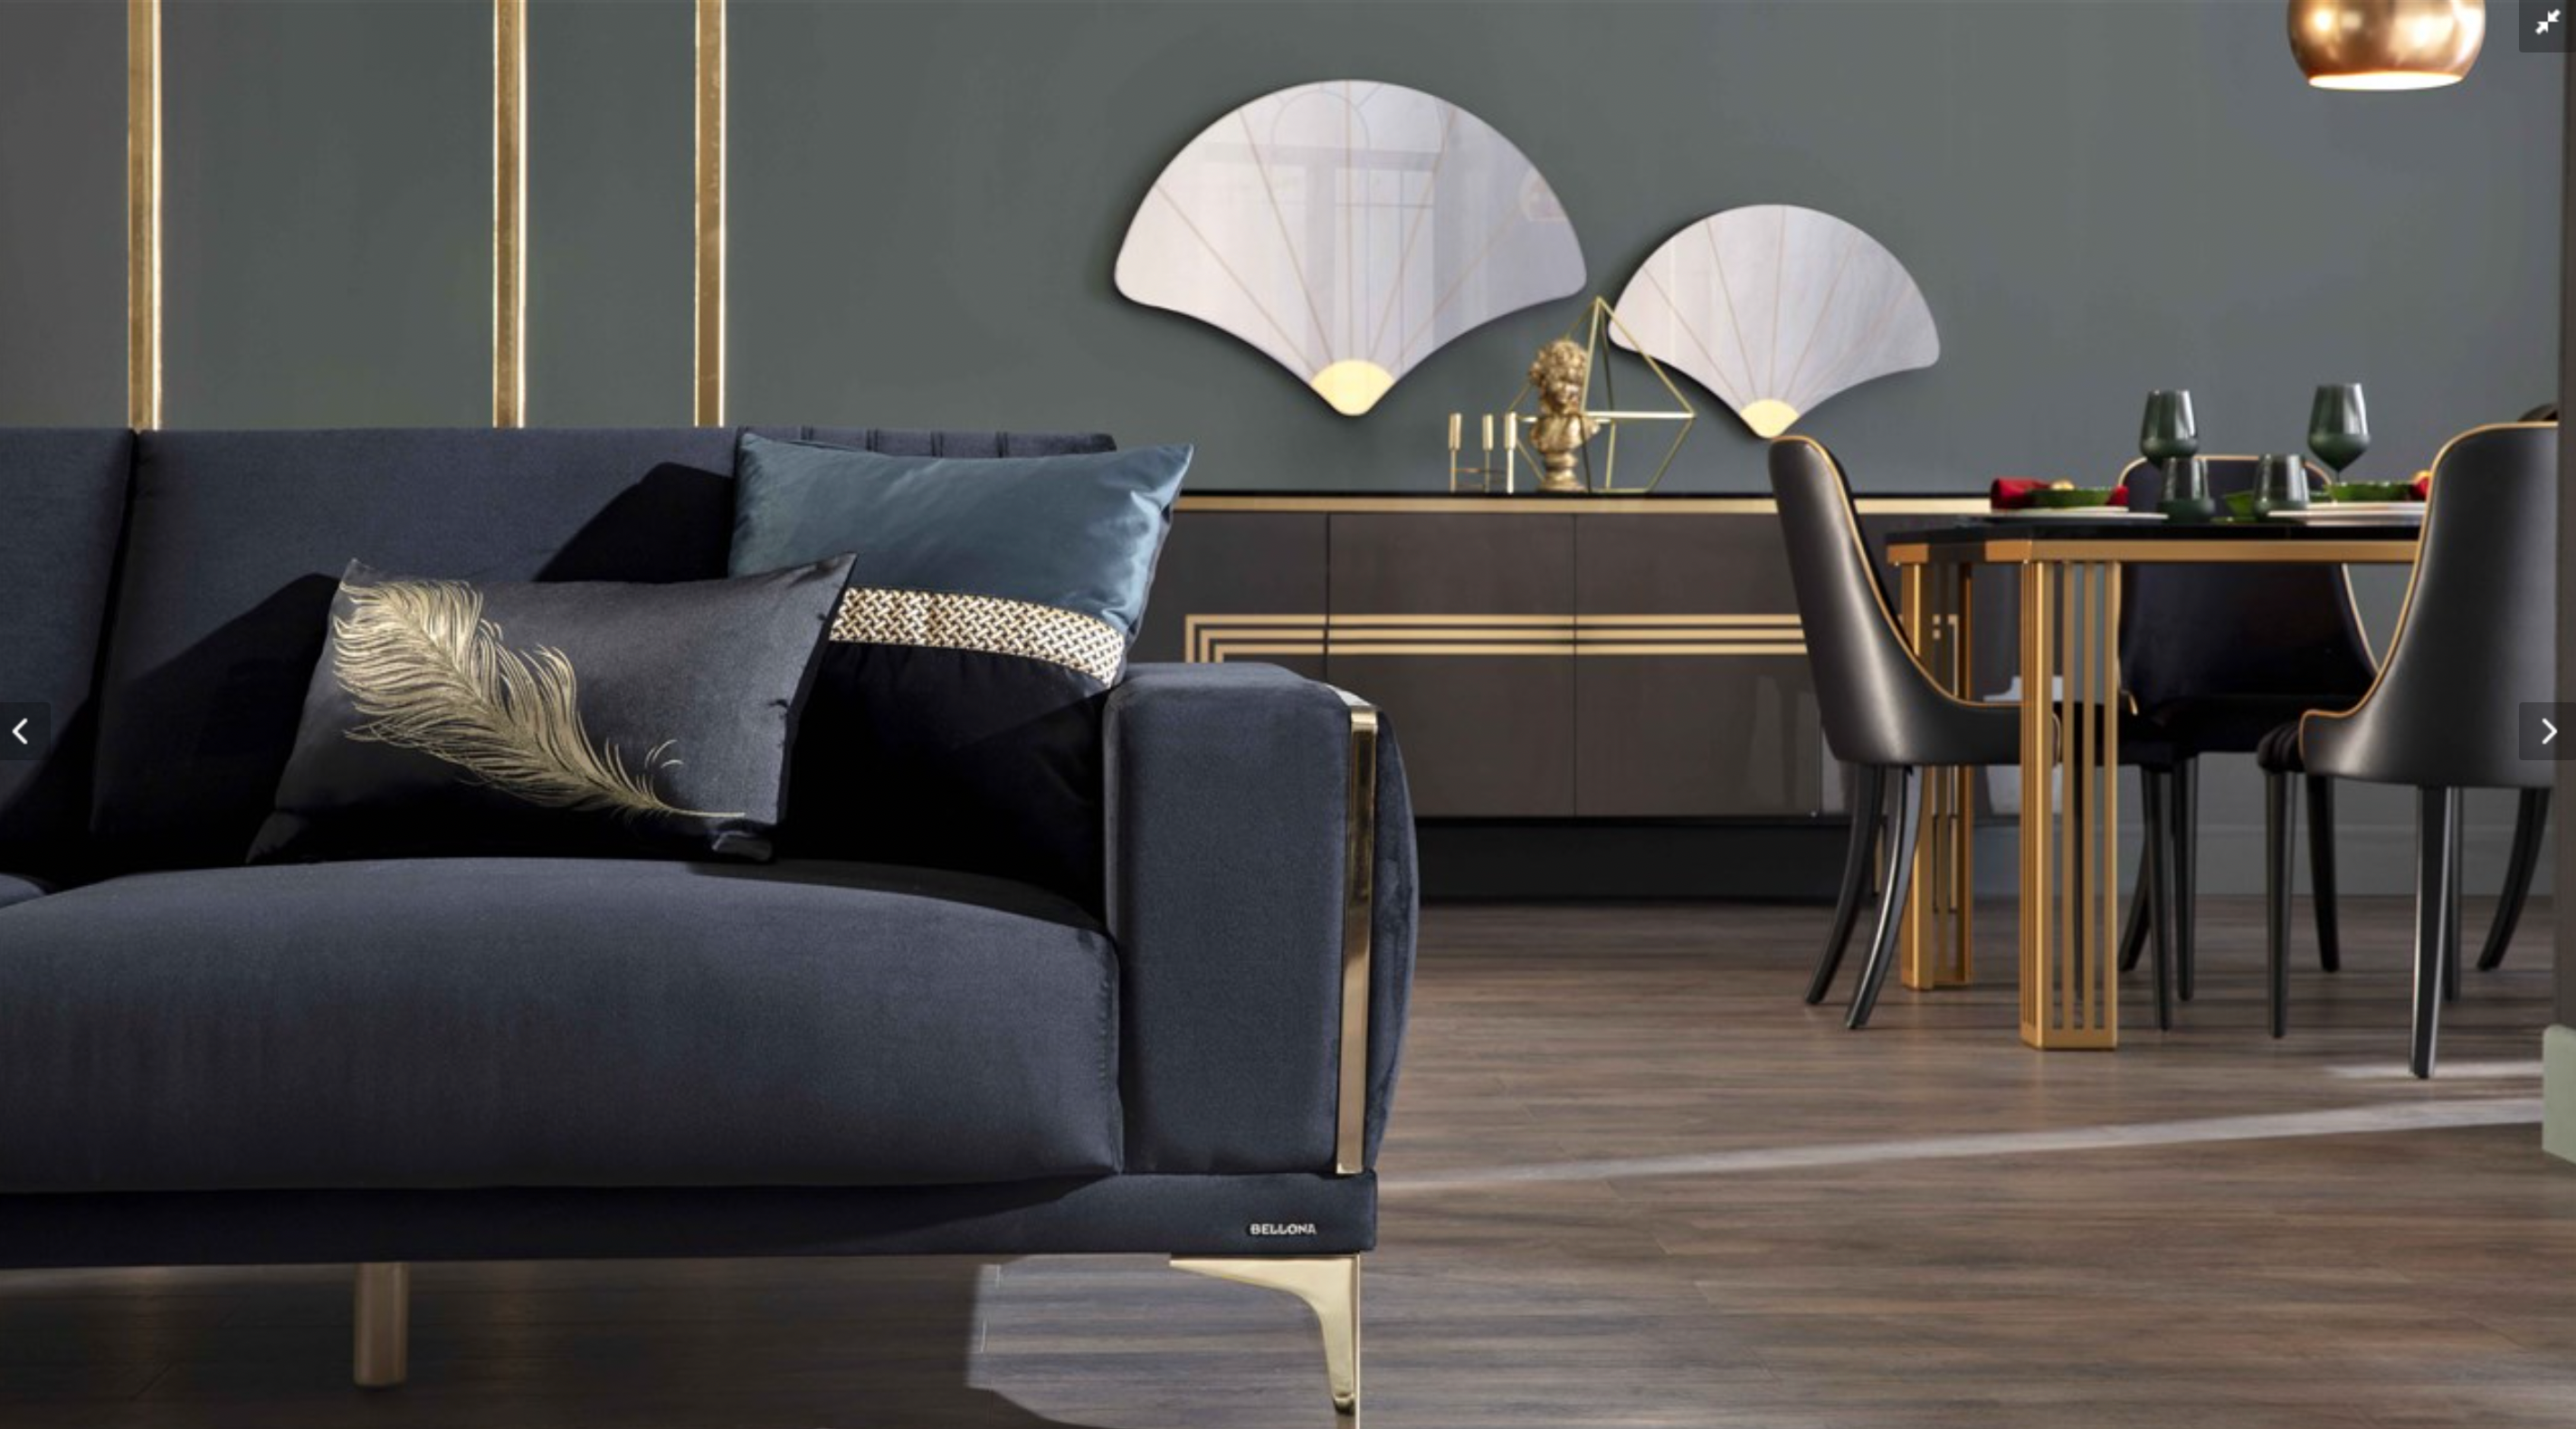 Gold-Trimmed Carlino Sofa with a Polished Aesthetic